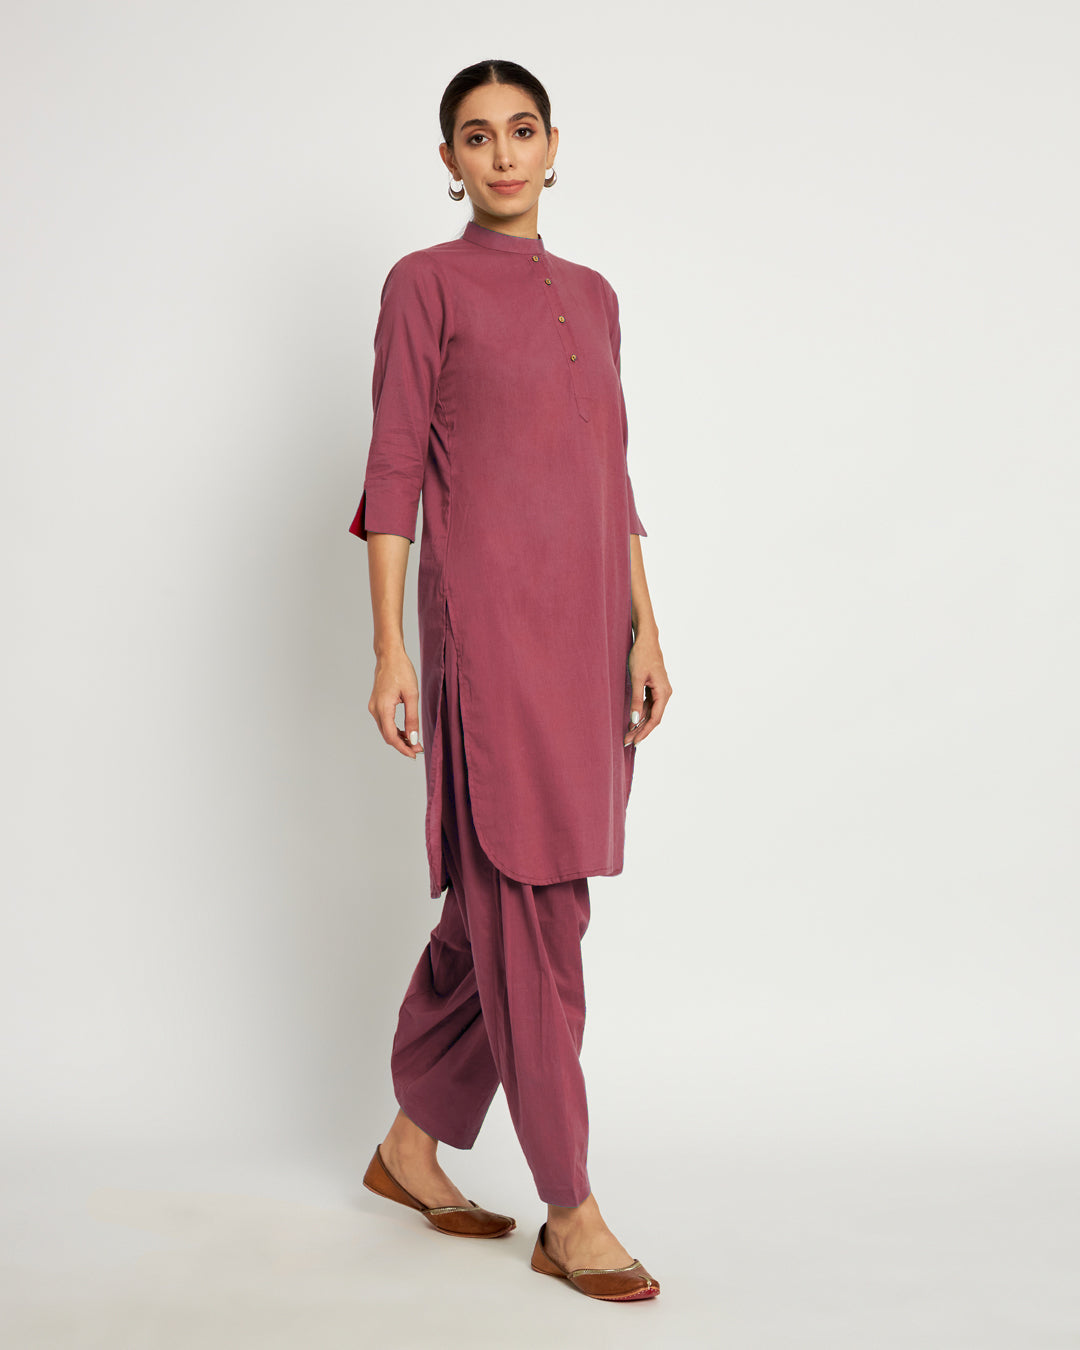 Wings of Rose Band Collar Neck Solid Kurta (Without Bottoms)